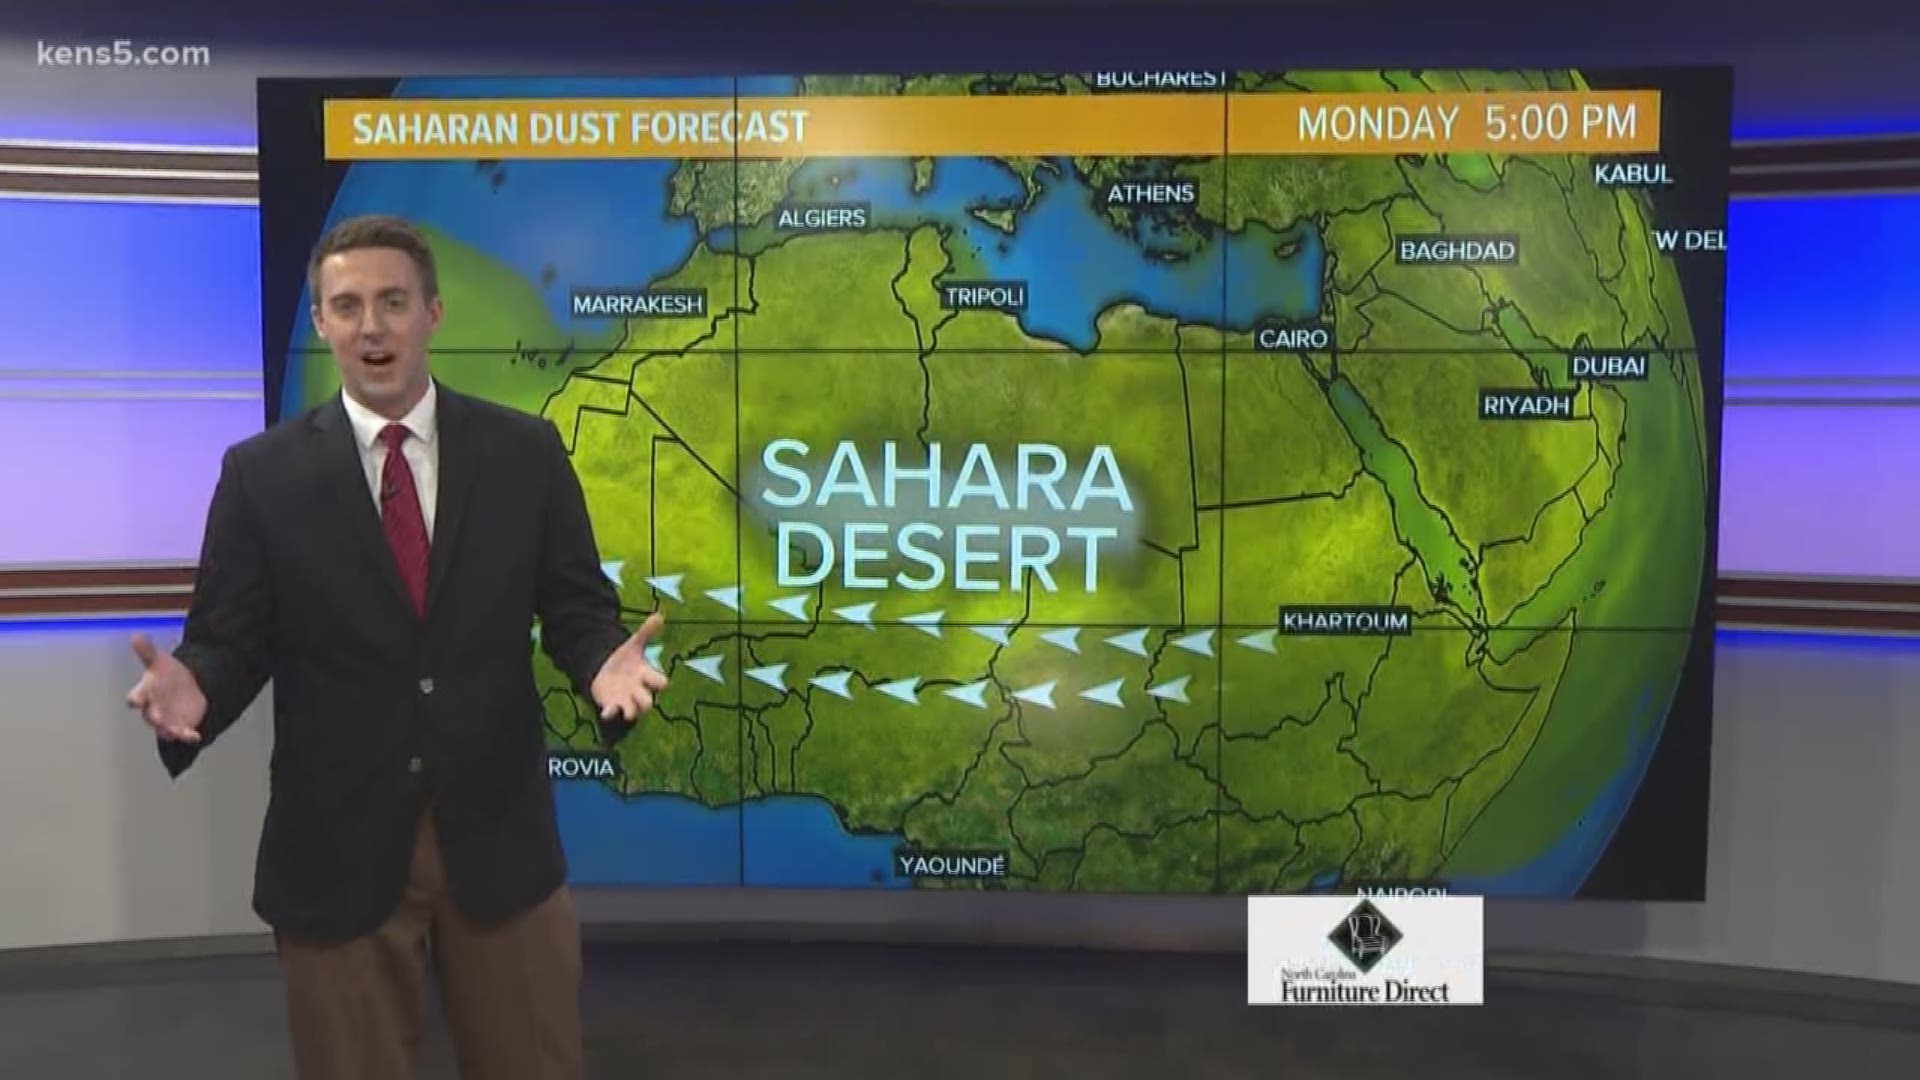 Saharan dust has traveled all the way across the Atlantic Ocean and will be in the air around San Antonio early this week, but how will it impact us?